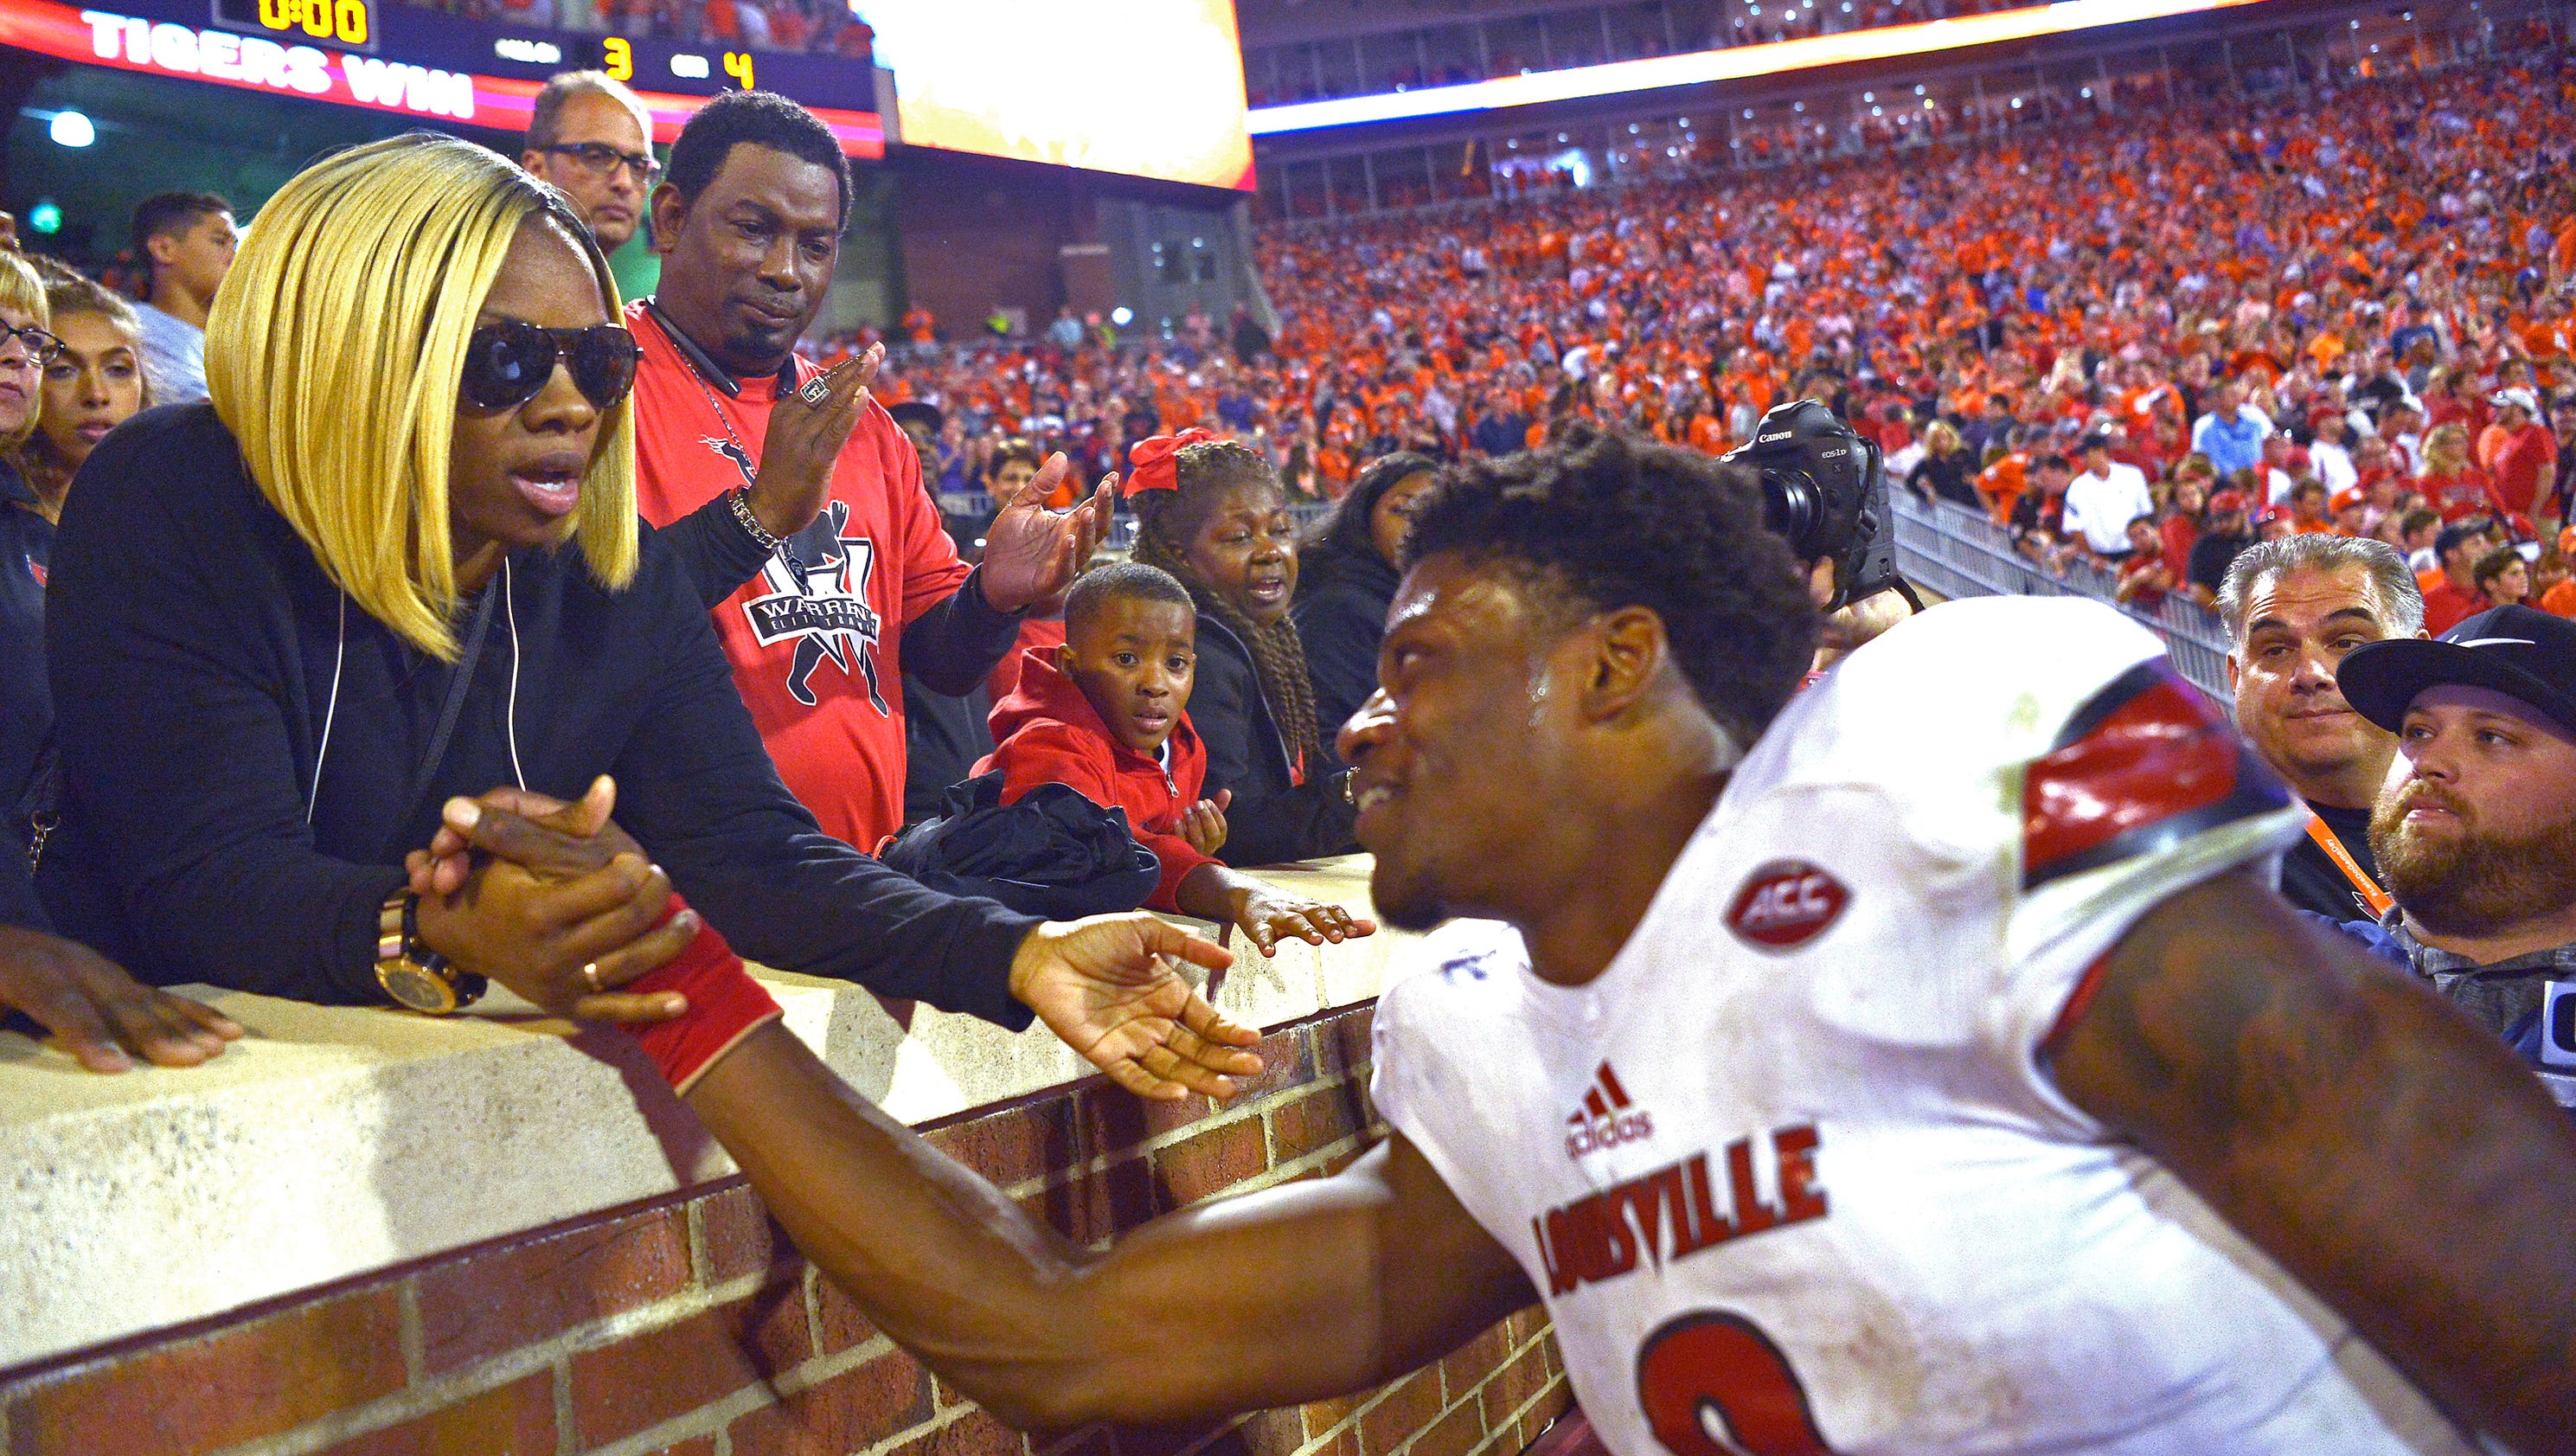 Louisville football | Quiet and private, Lamar Jackson's play speaks volumes